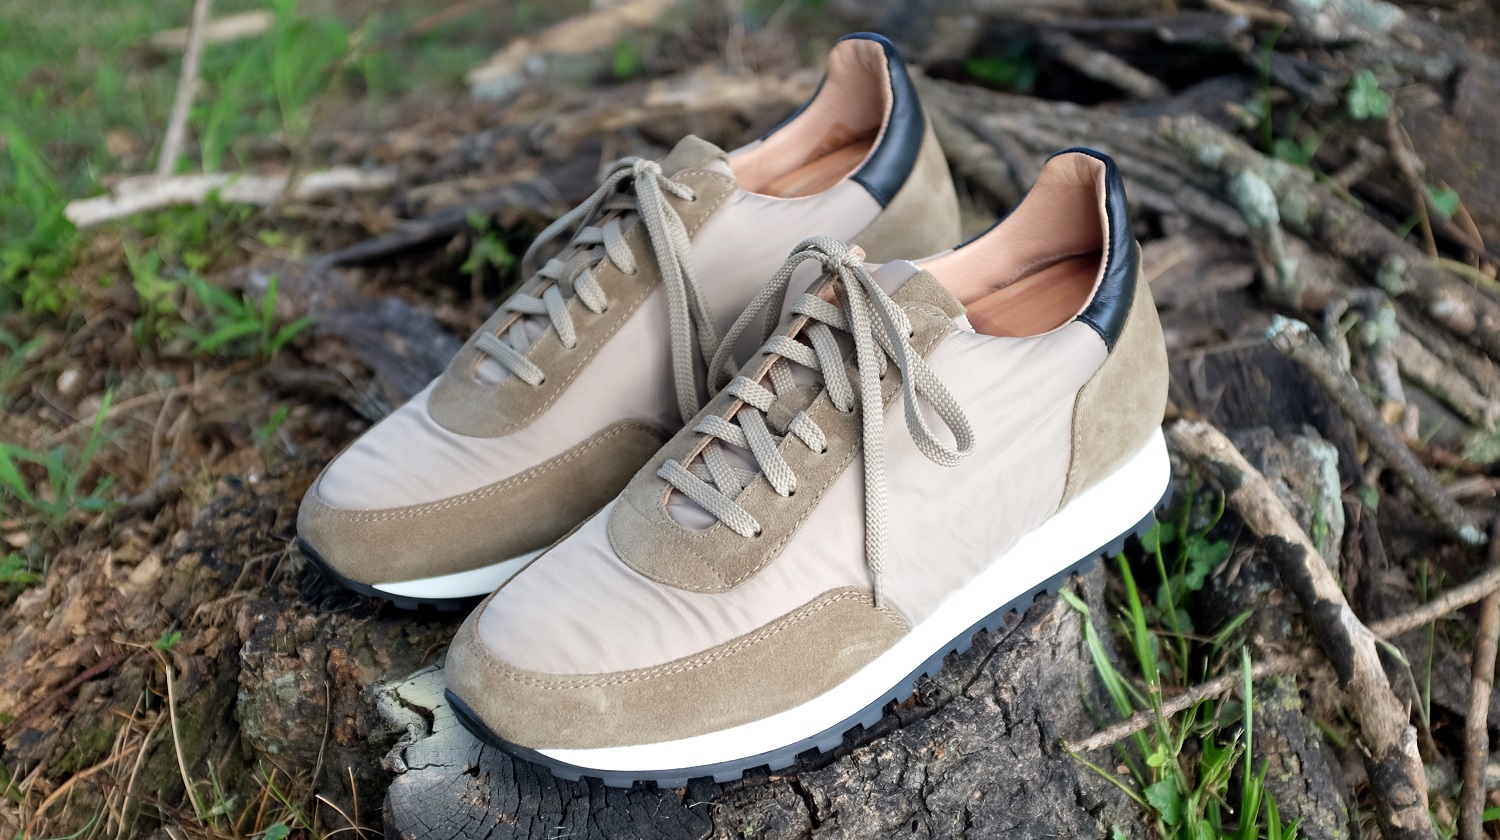 Paseo trigo Existe In Review: The Made in Italy Huckberry Vintage Runner